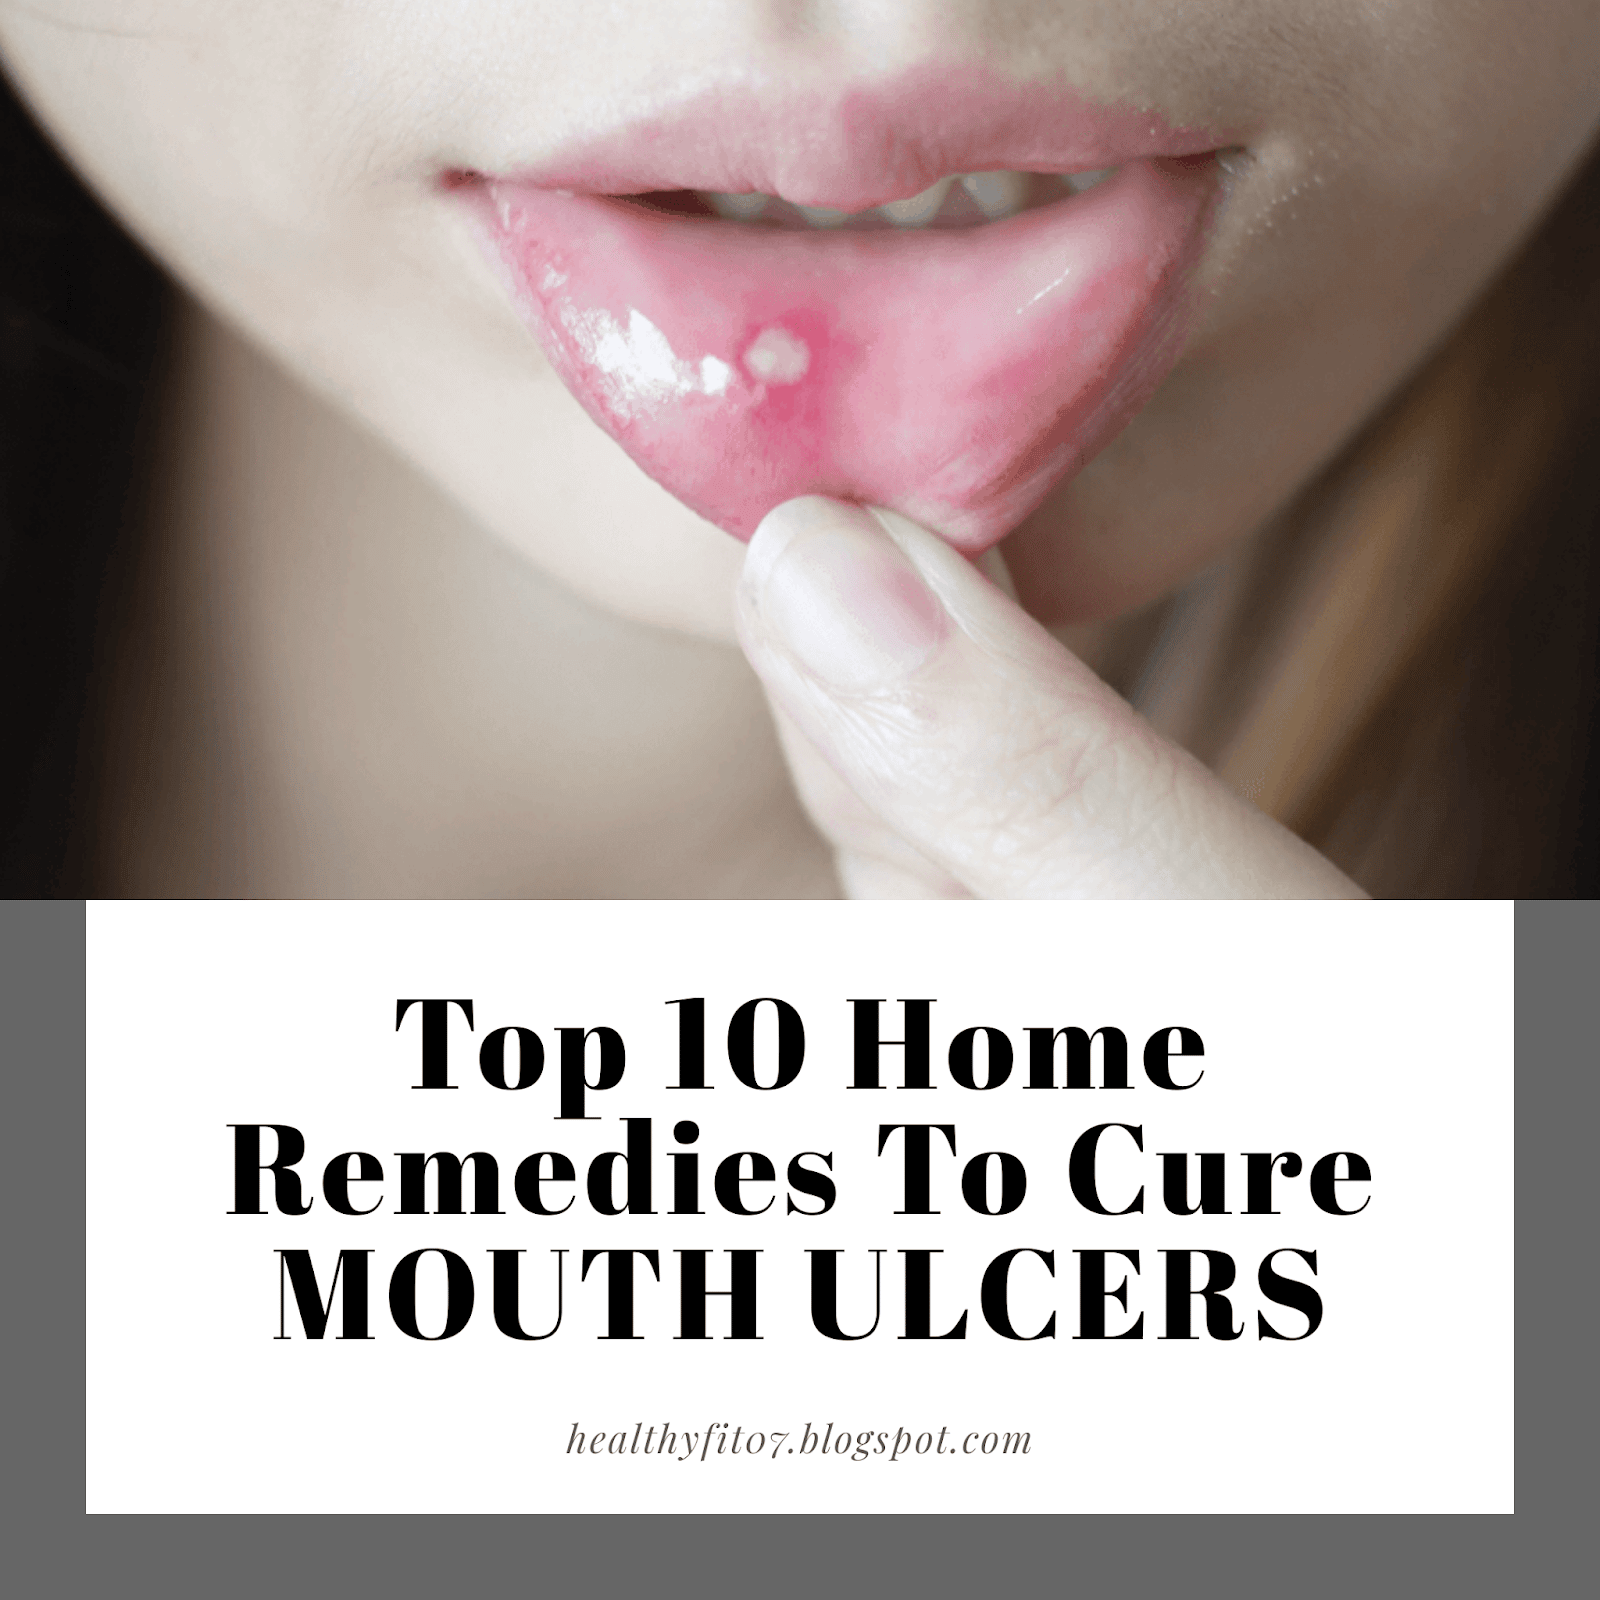 Top 10 Home Remedies To Cure MOUTH ULCERS